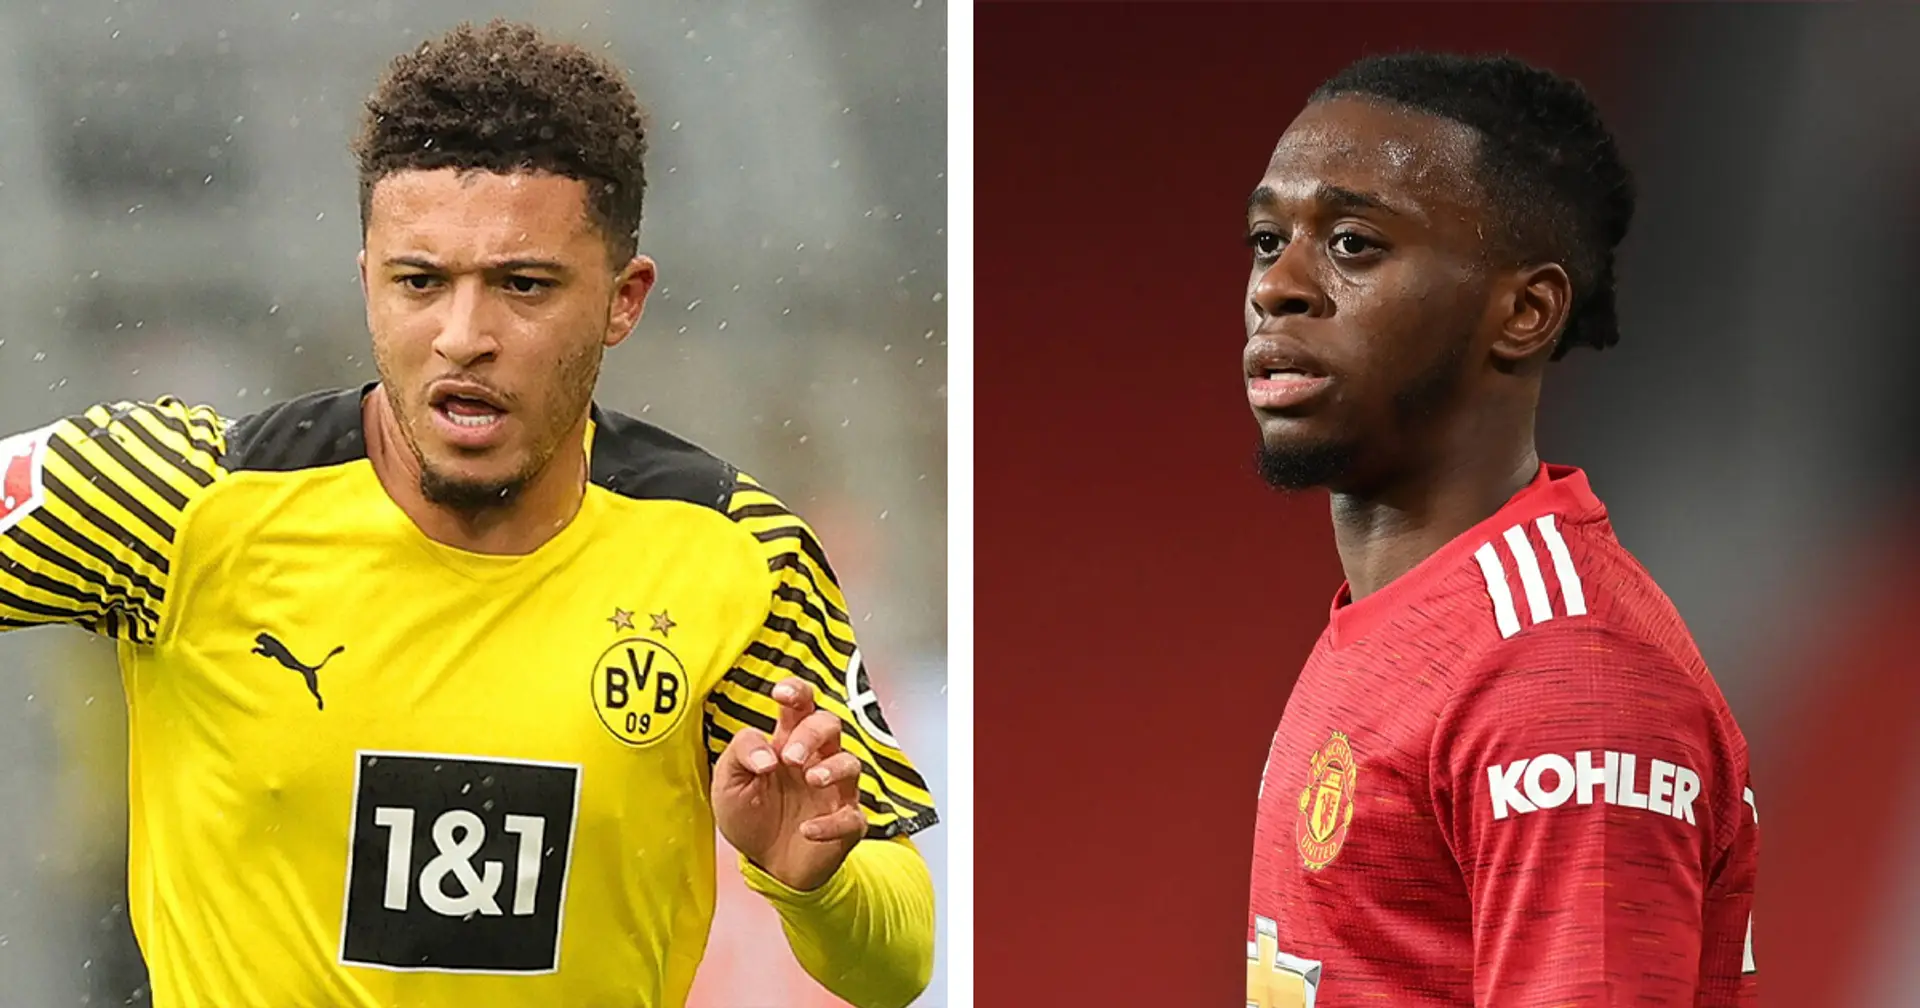 Dortmund fan explains why Sancho might start slow at United - and what Wan-Bissaka might have to do with it